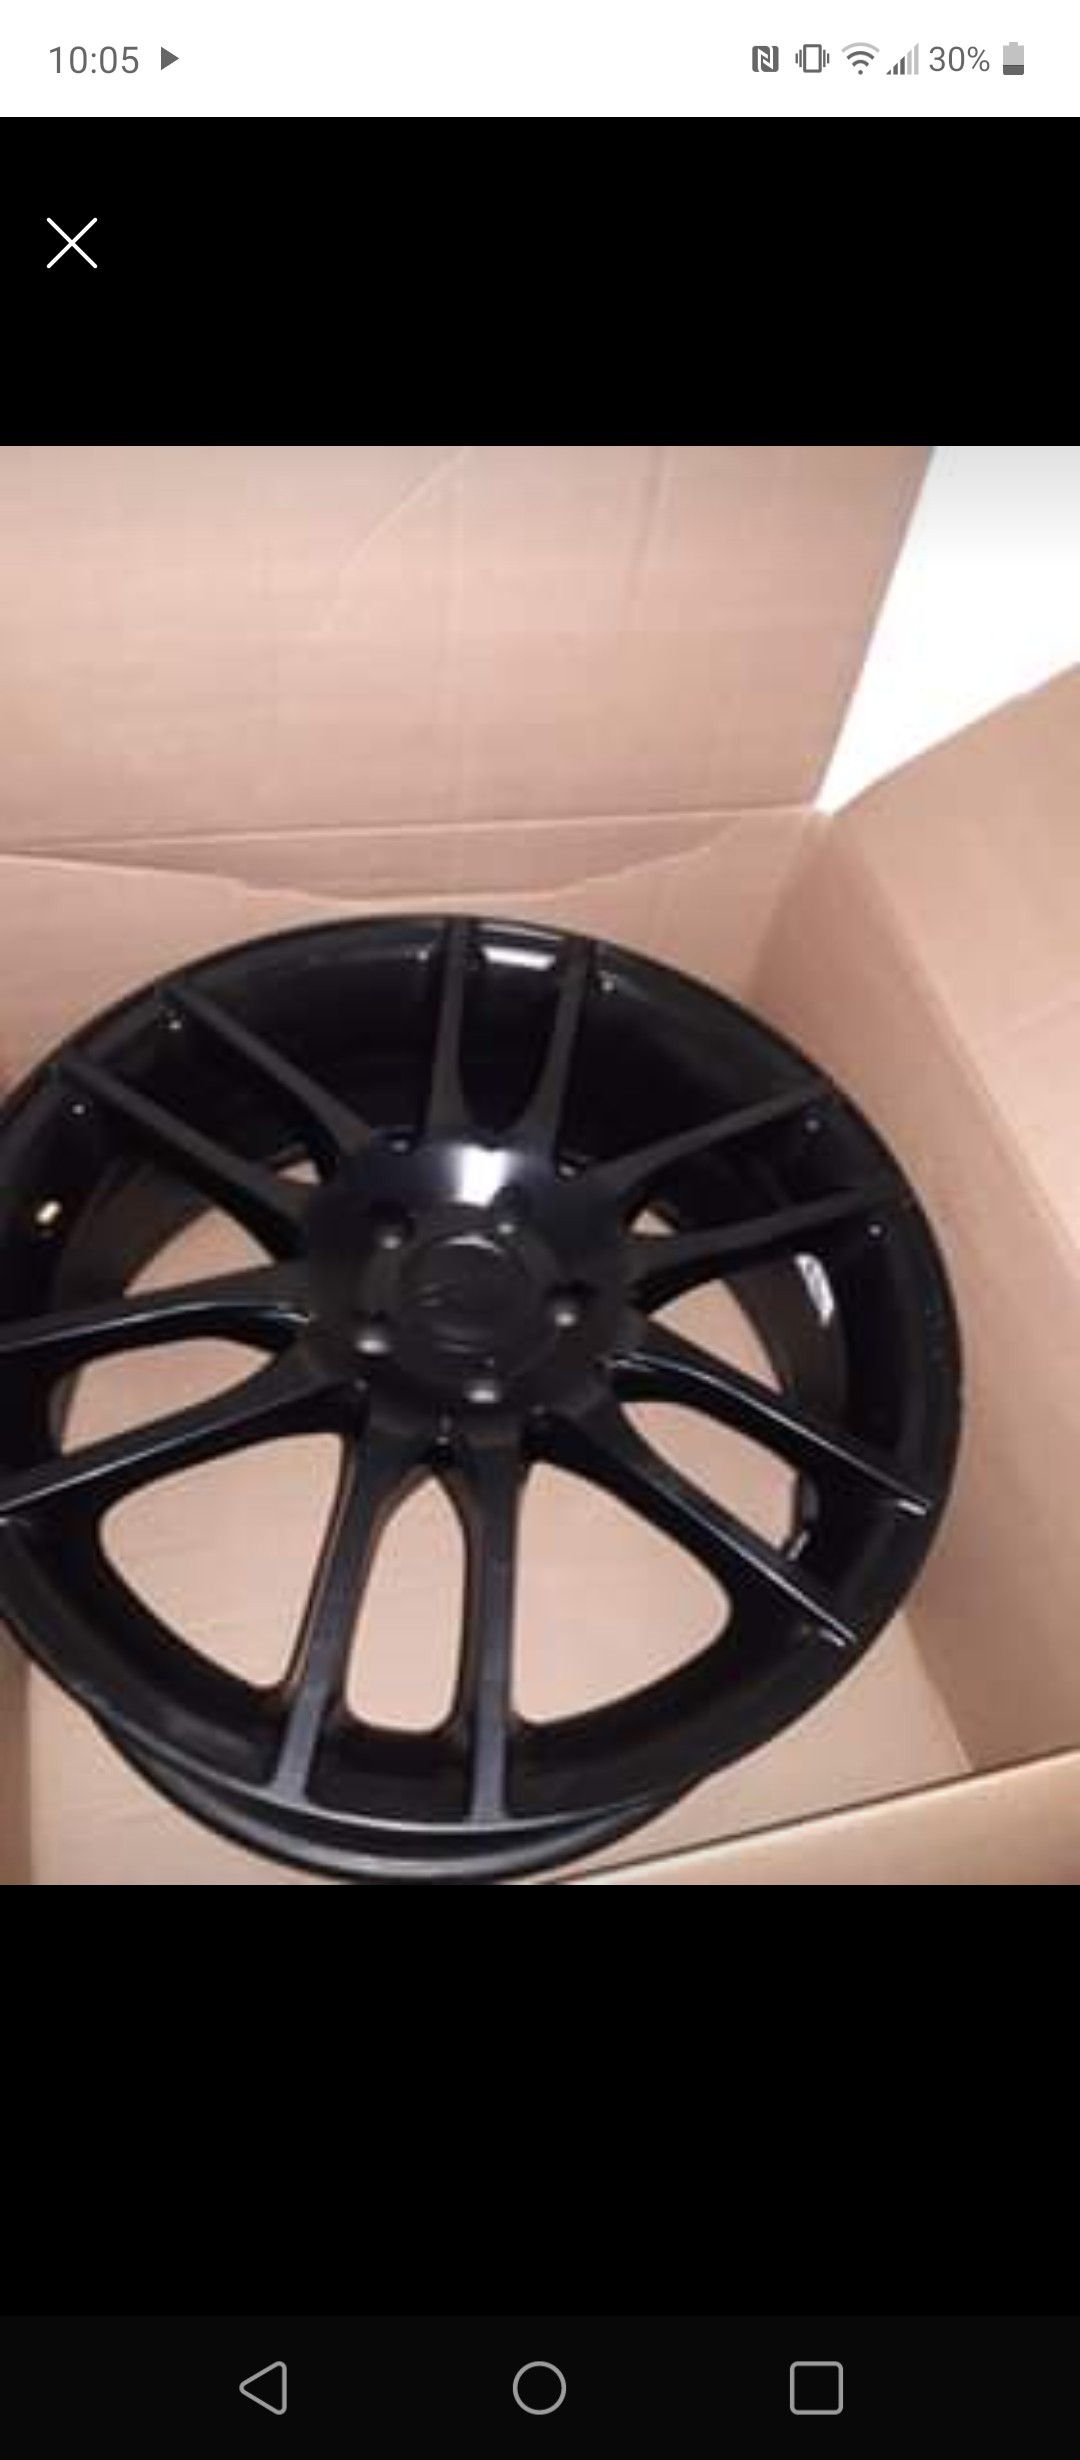 Brand new rims need gone asap. South la pick up only